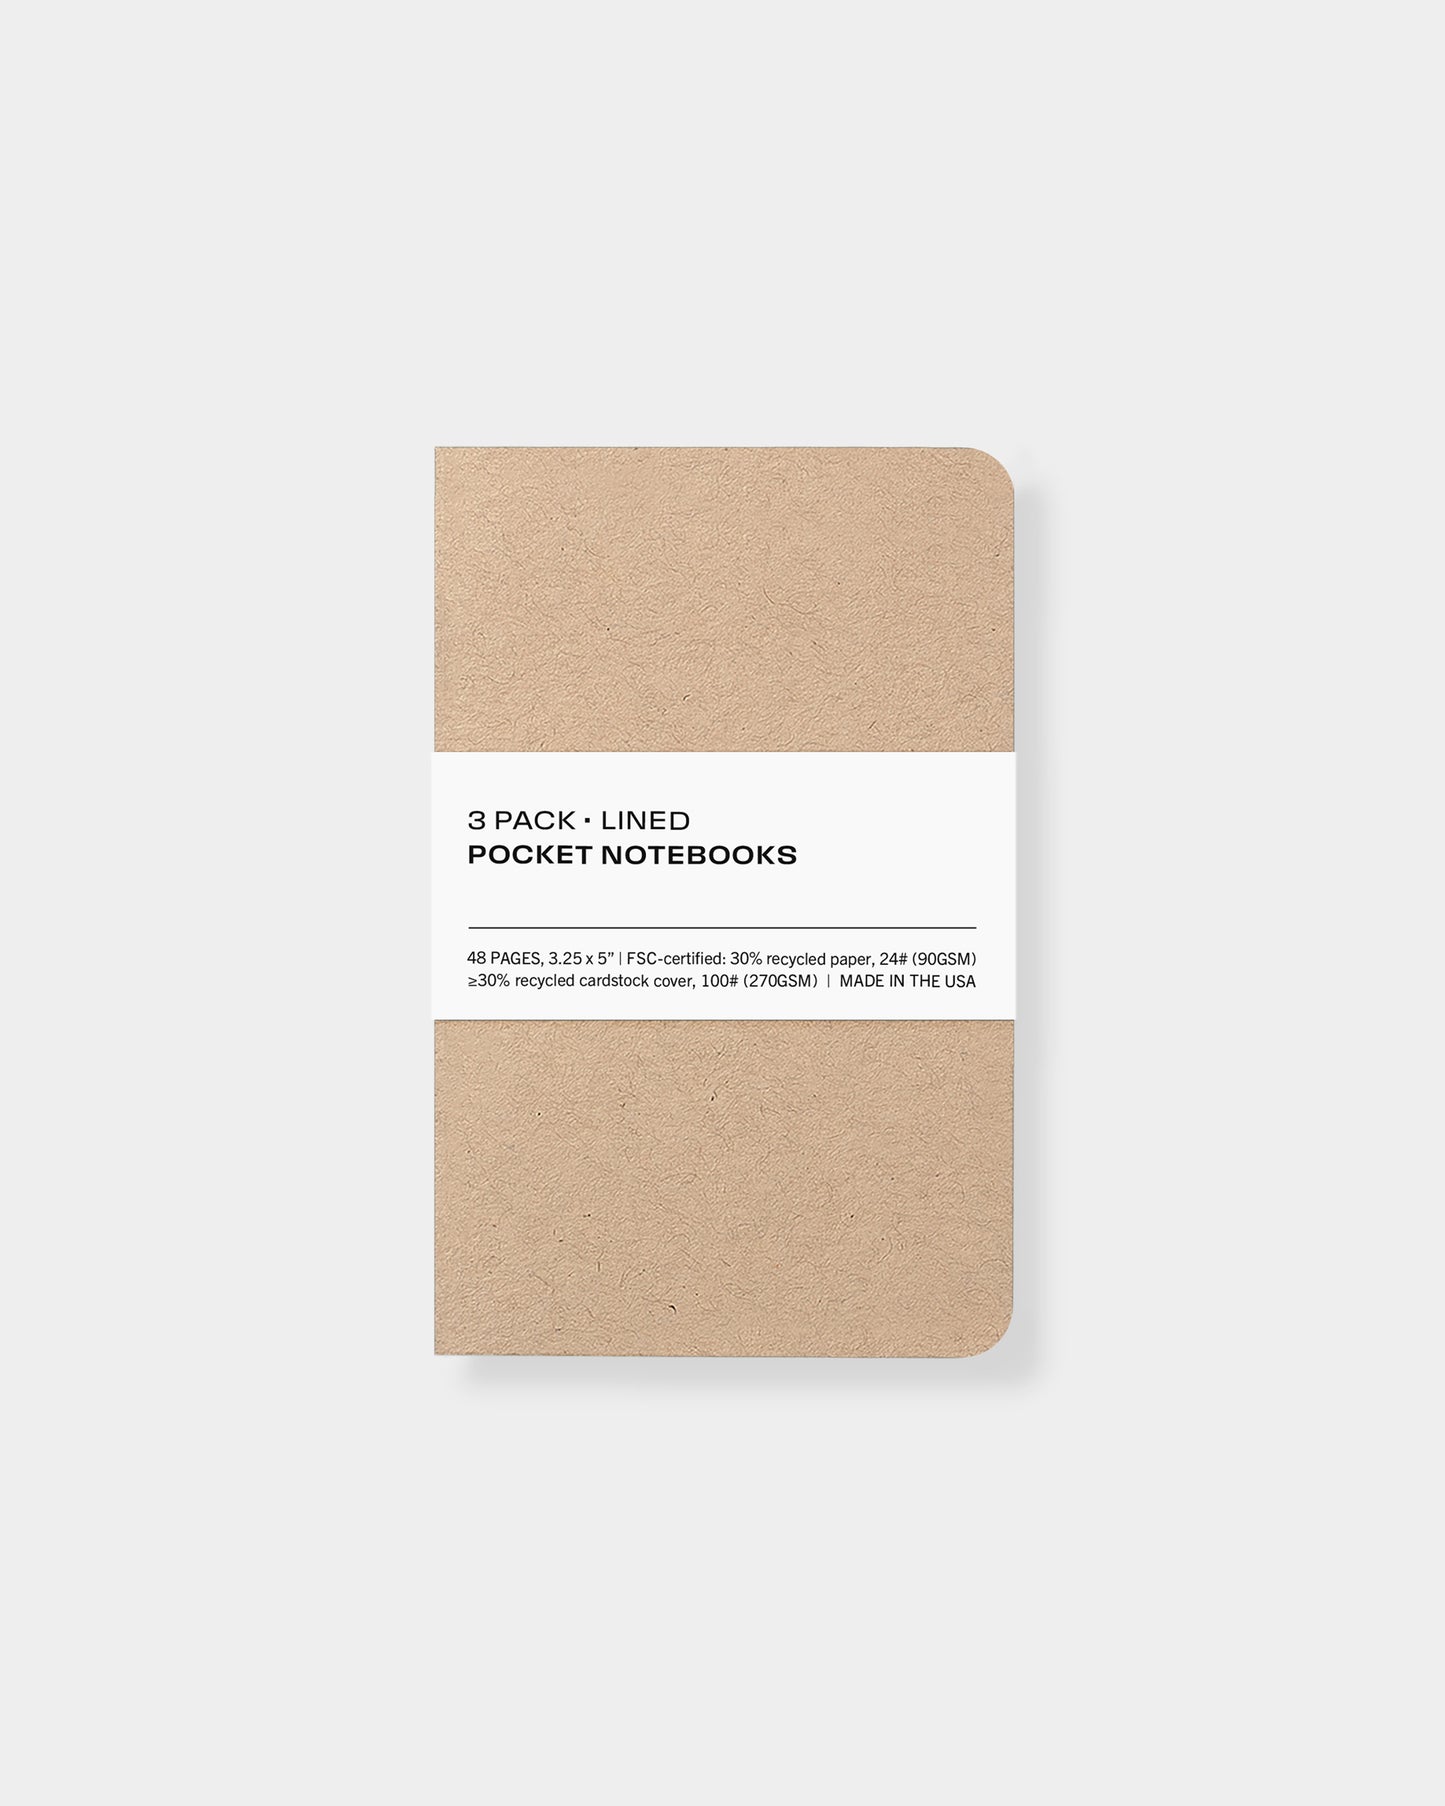 3 pack pocket notebooks, 3.25 x 5", made with eco-friendly papers. Lined paper pages, kraft color way.